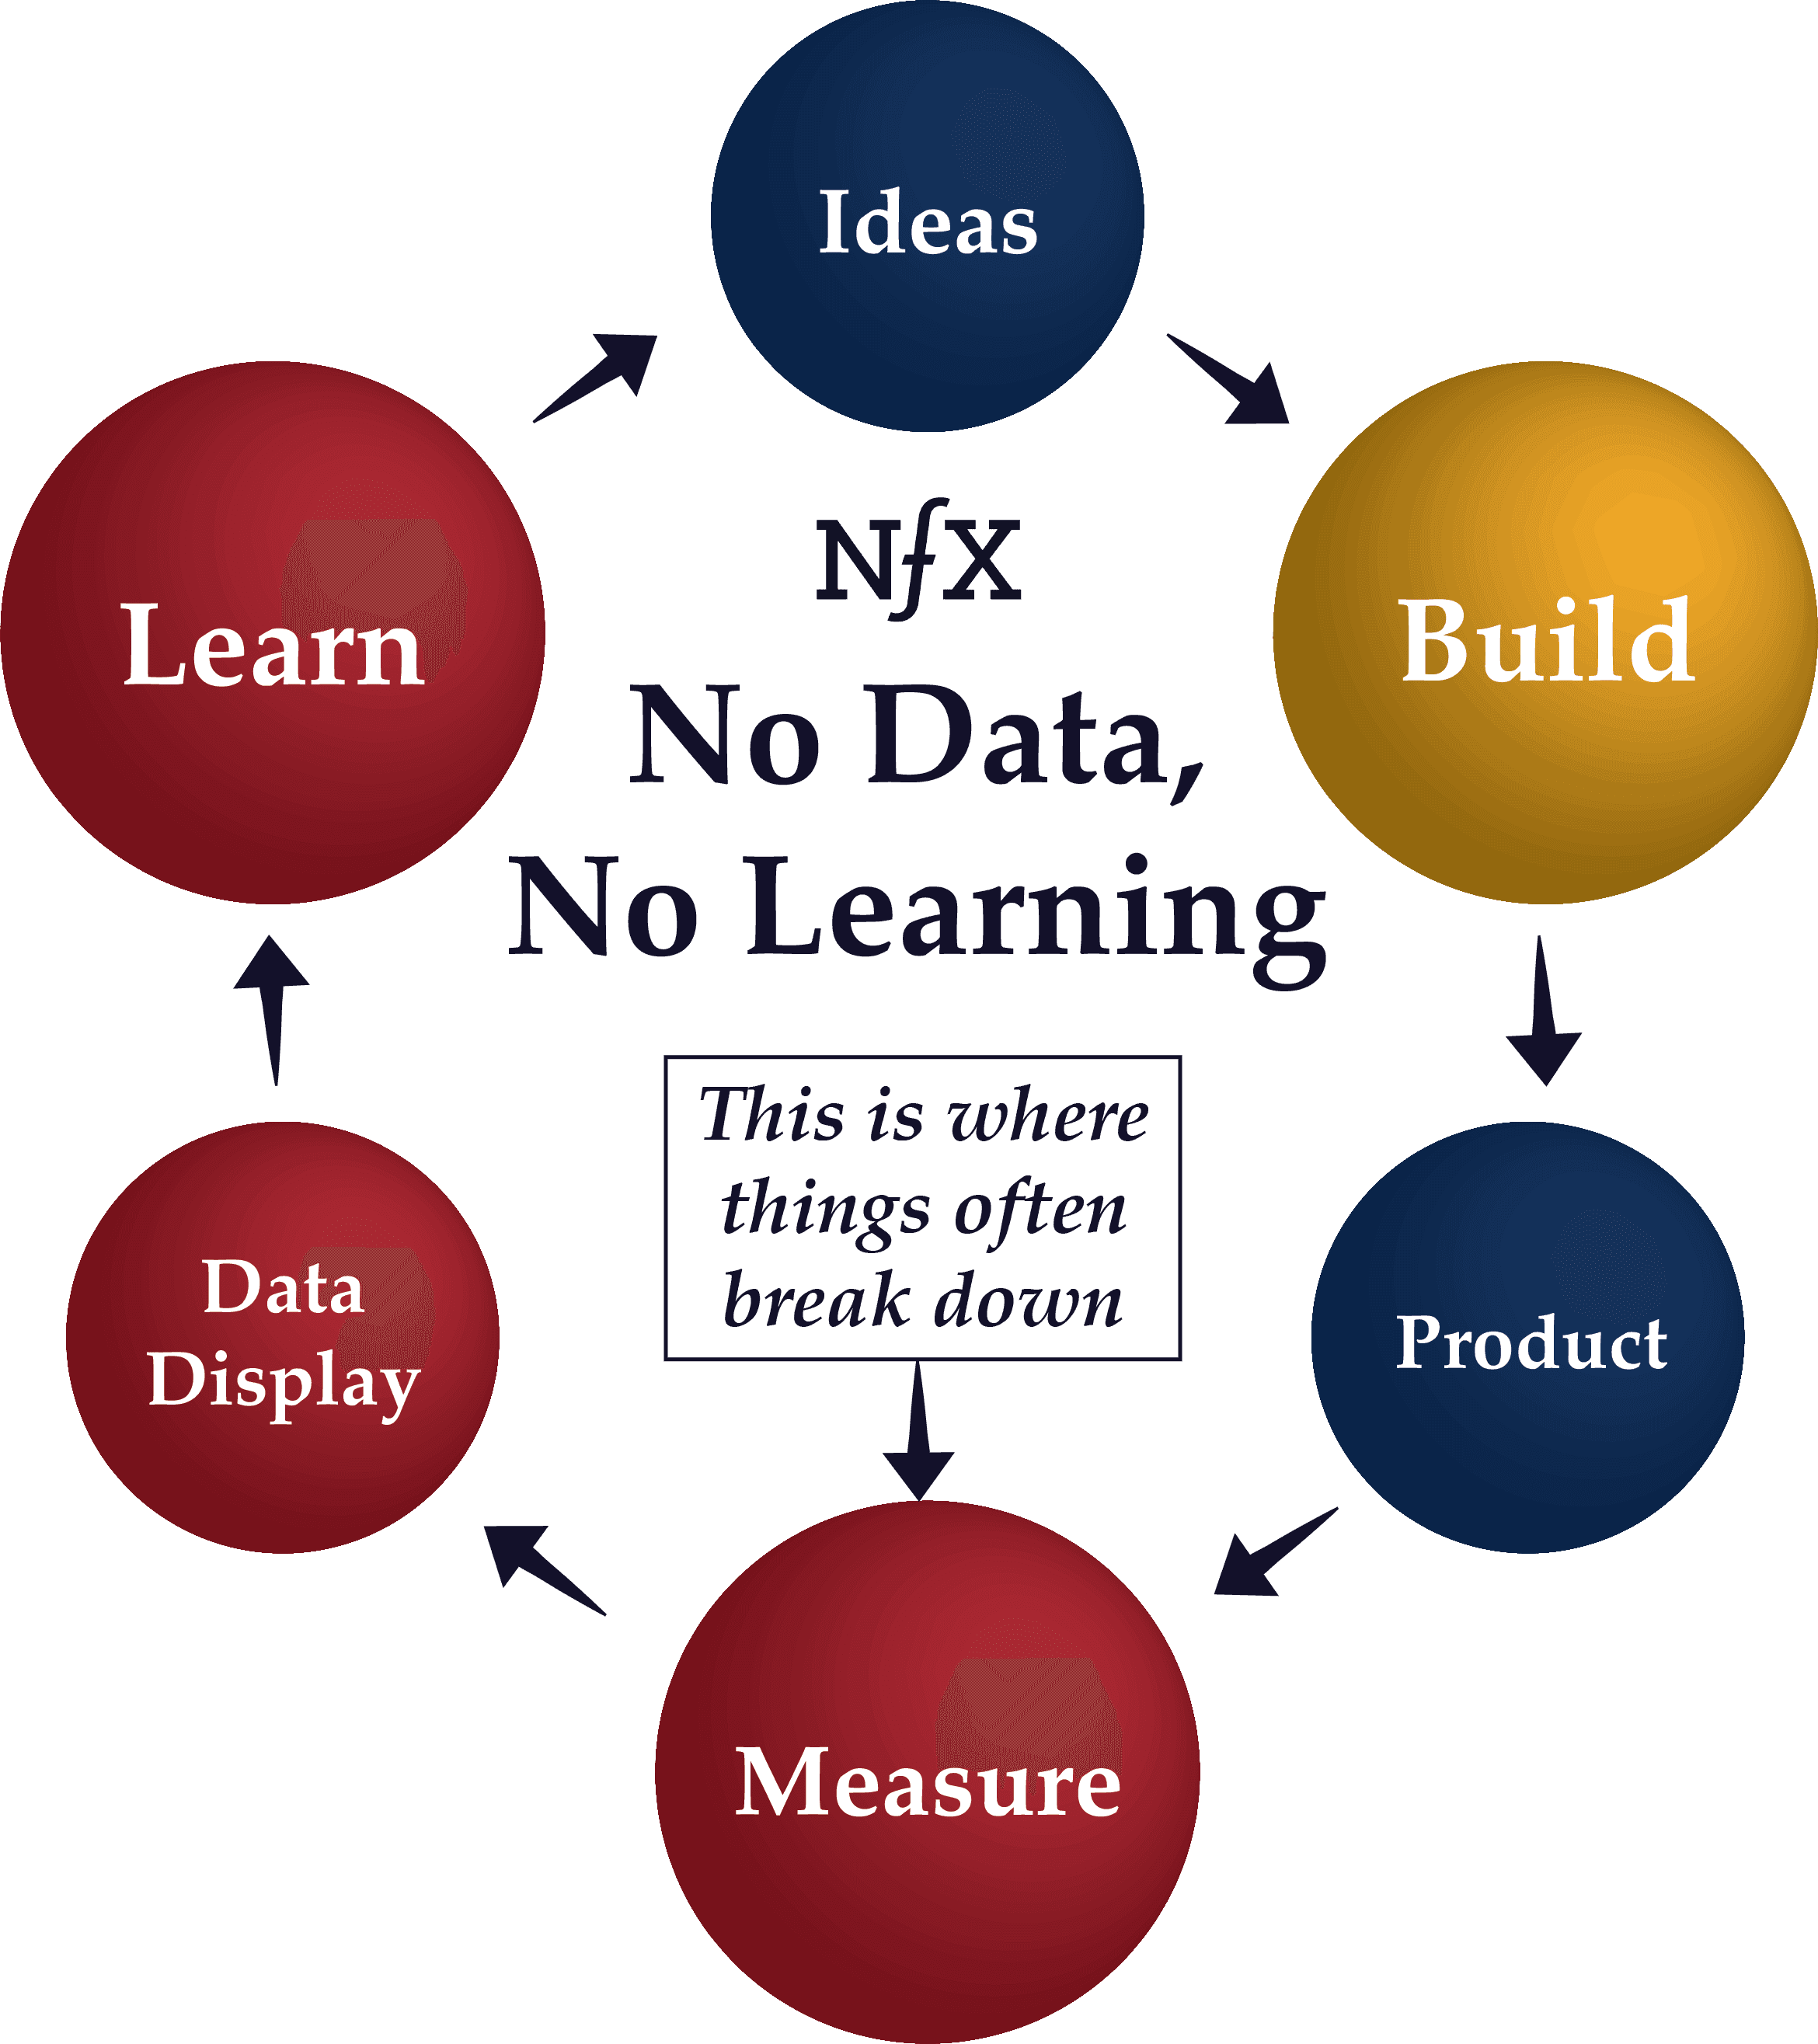 How data leads to learning